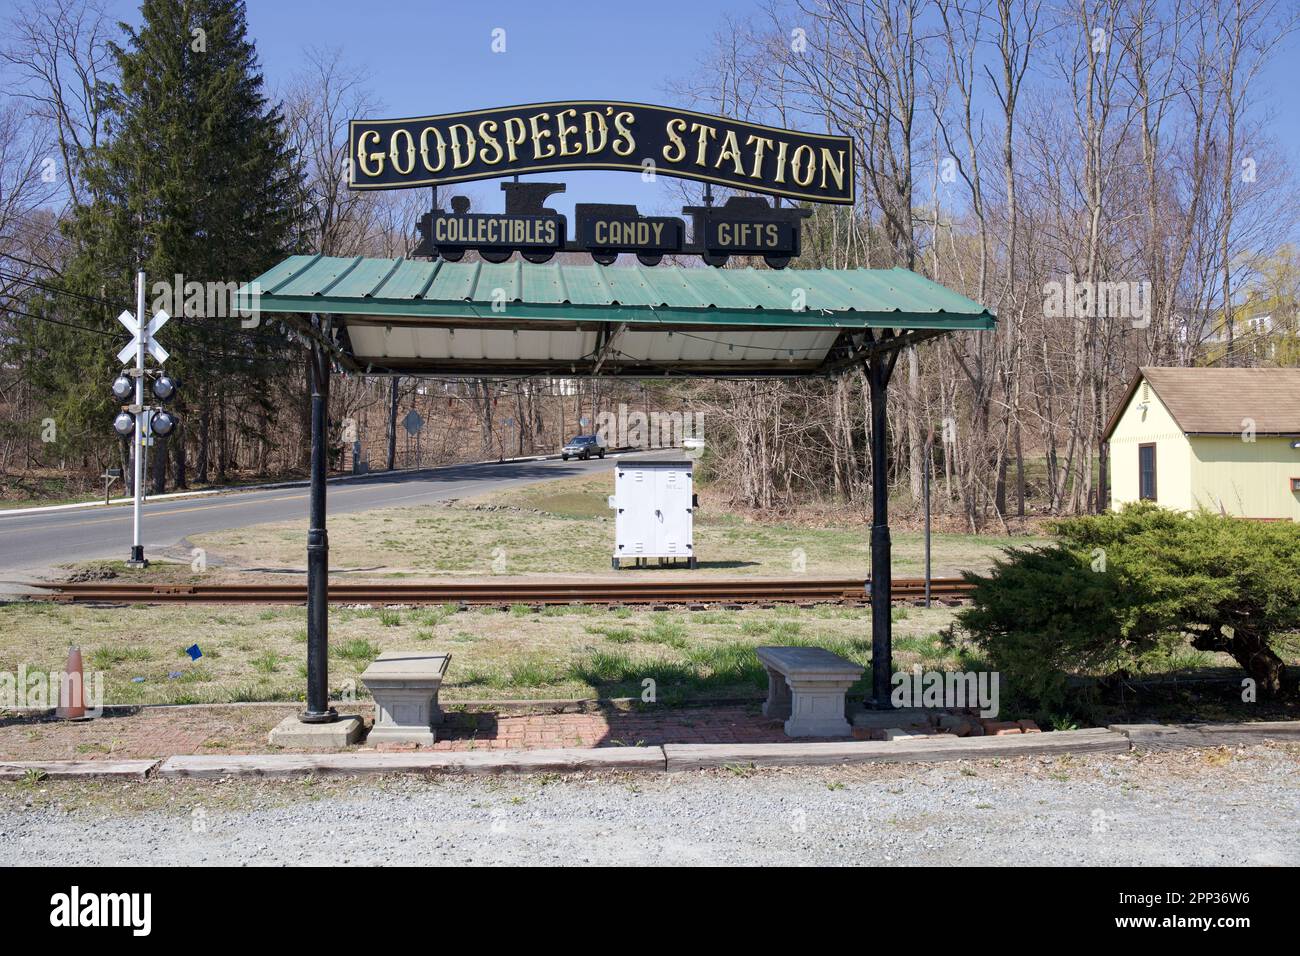 Haddam, Connecticut, USA: sign for Goodspeed's Station: Collectibles, Candy, and Gifts. With railroad track, street, and car behind the s Stock Photo